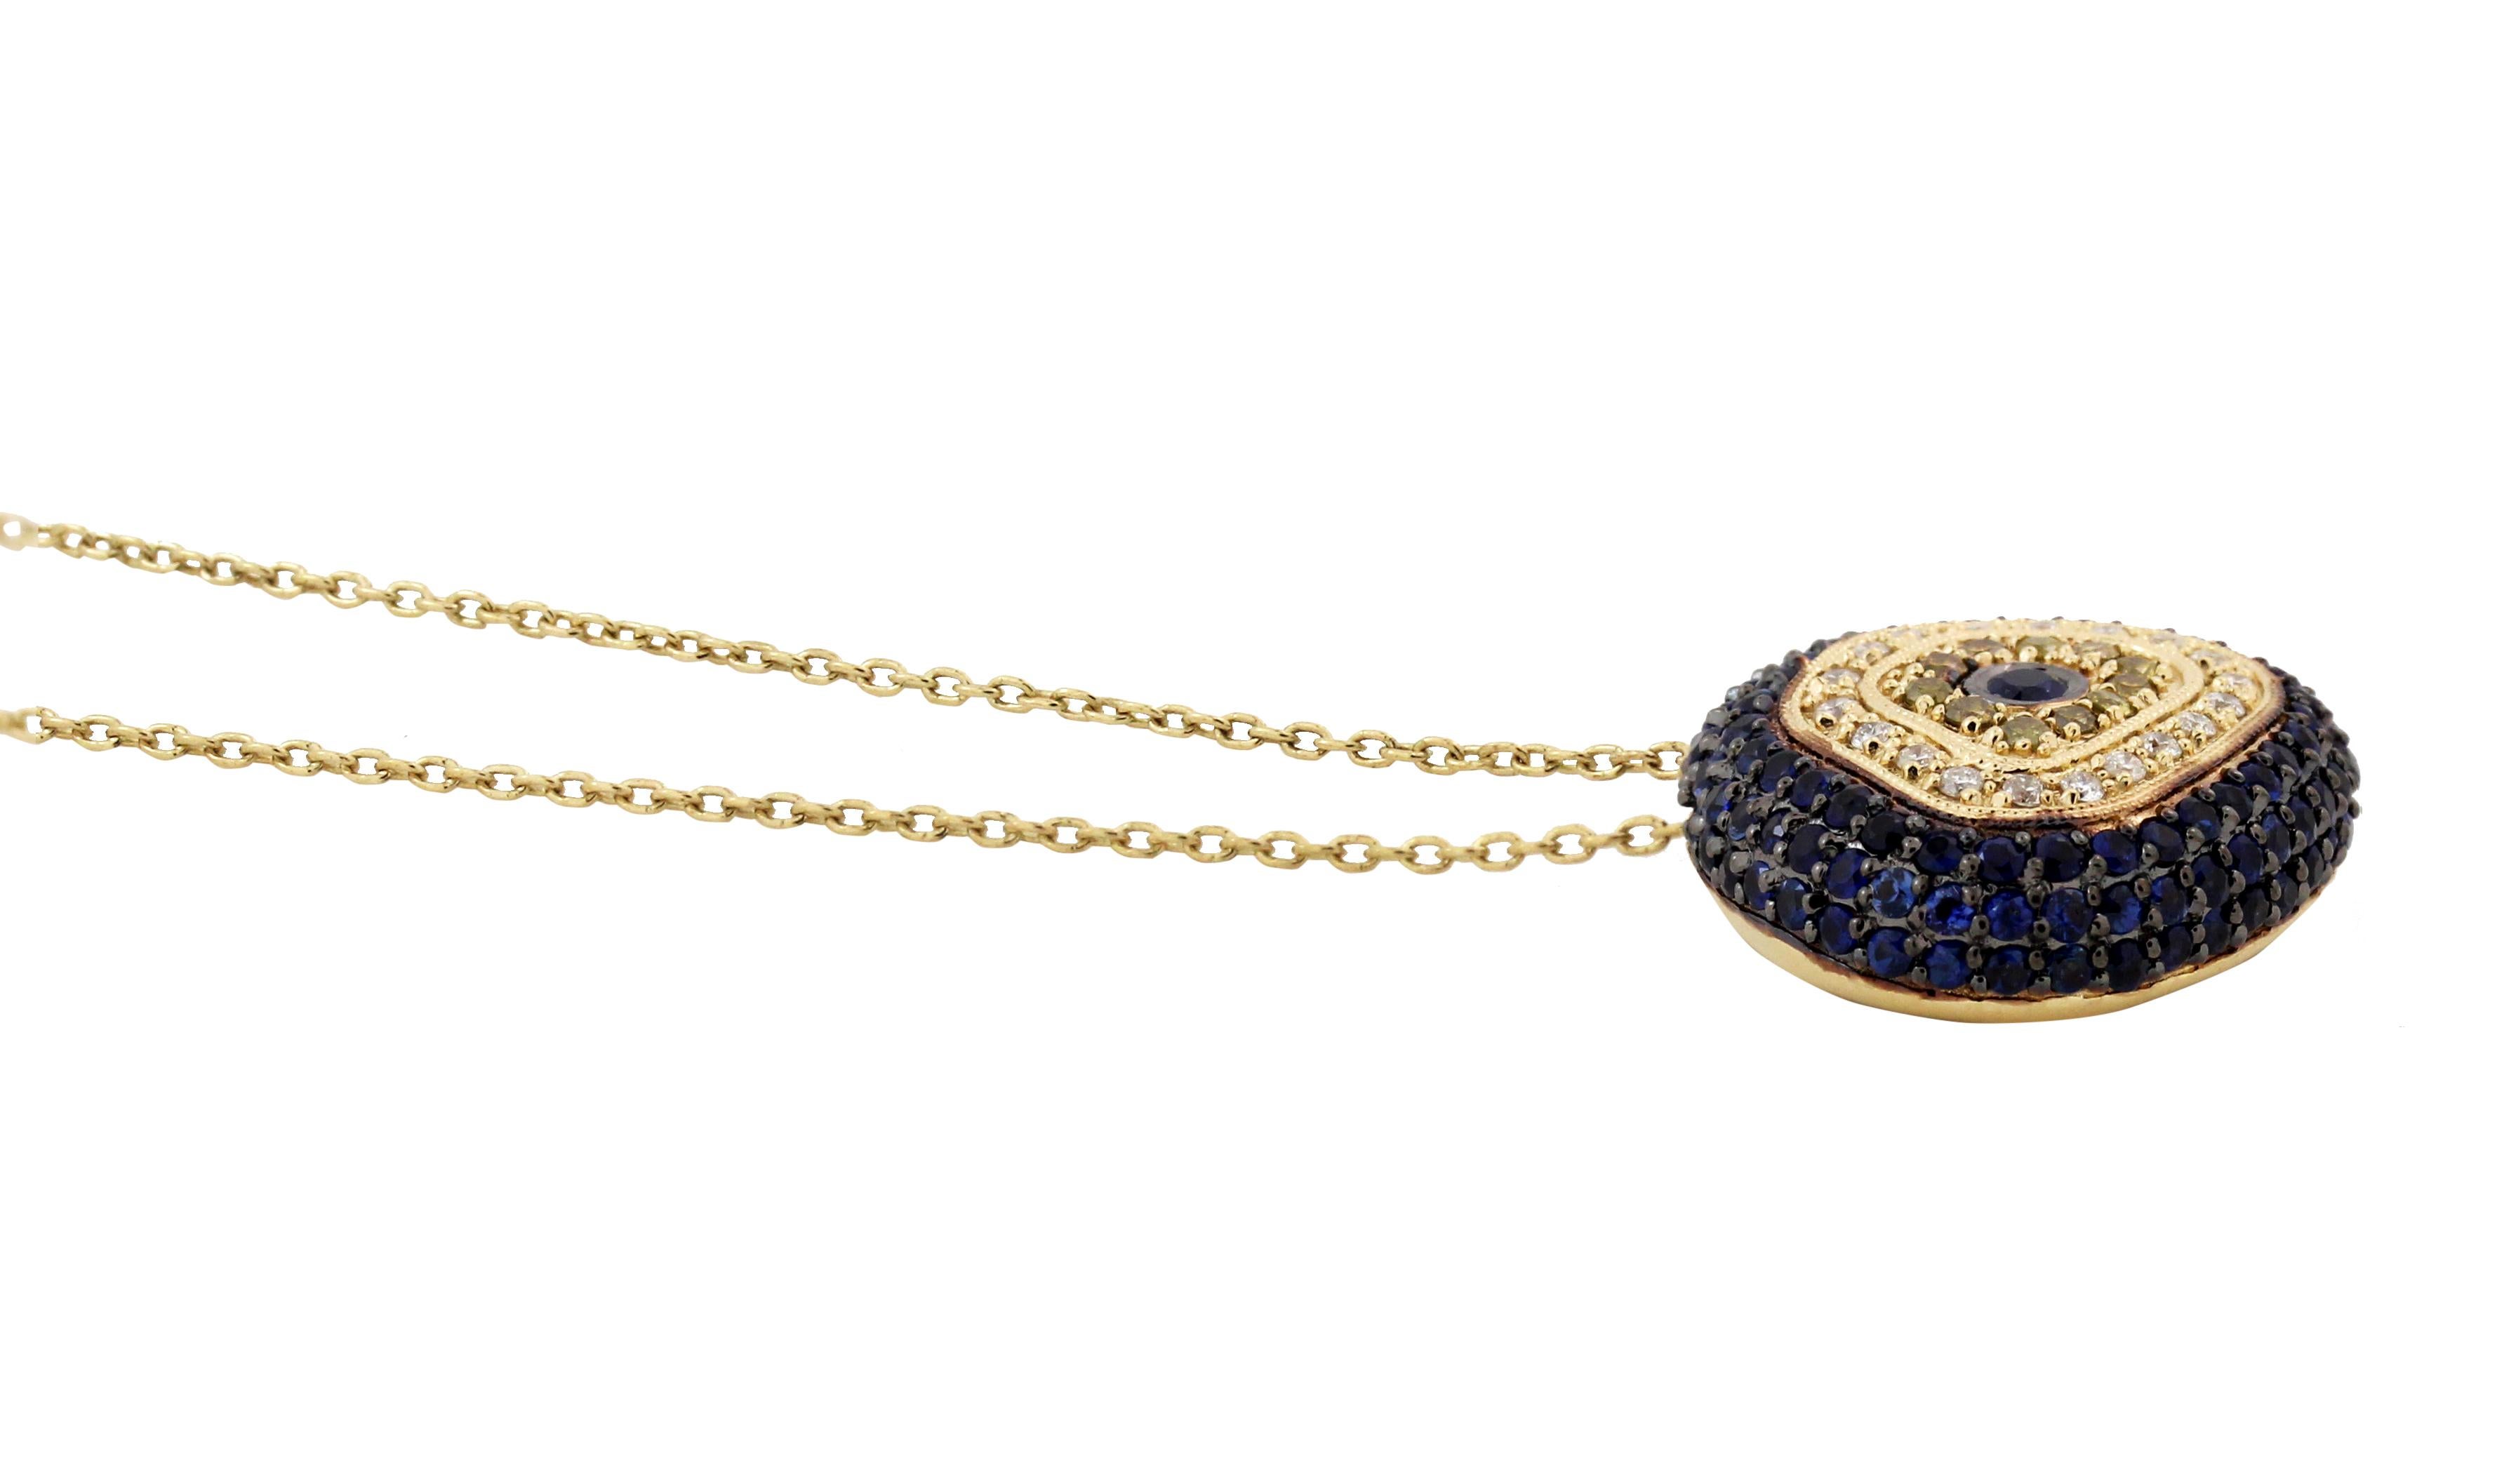 14K Yellow Gold Evil Eye Odd Shape Pendant Necklace with Diamonds and Sapphires
0.27 carat total weight H color, SI  clarity diamonds 
1.26 carat Blue and Yellow Sapphires
5.80  grams 14K gold  
19mm W x 17mm L face  / 17 inch chain total length.